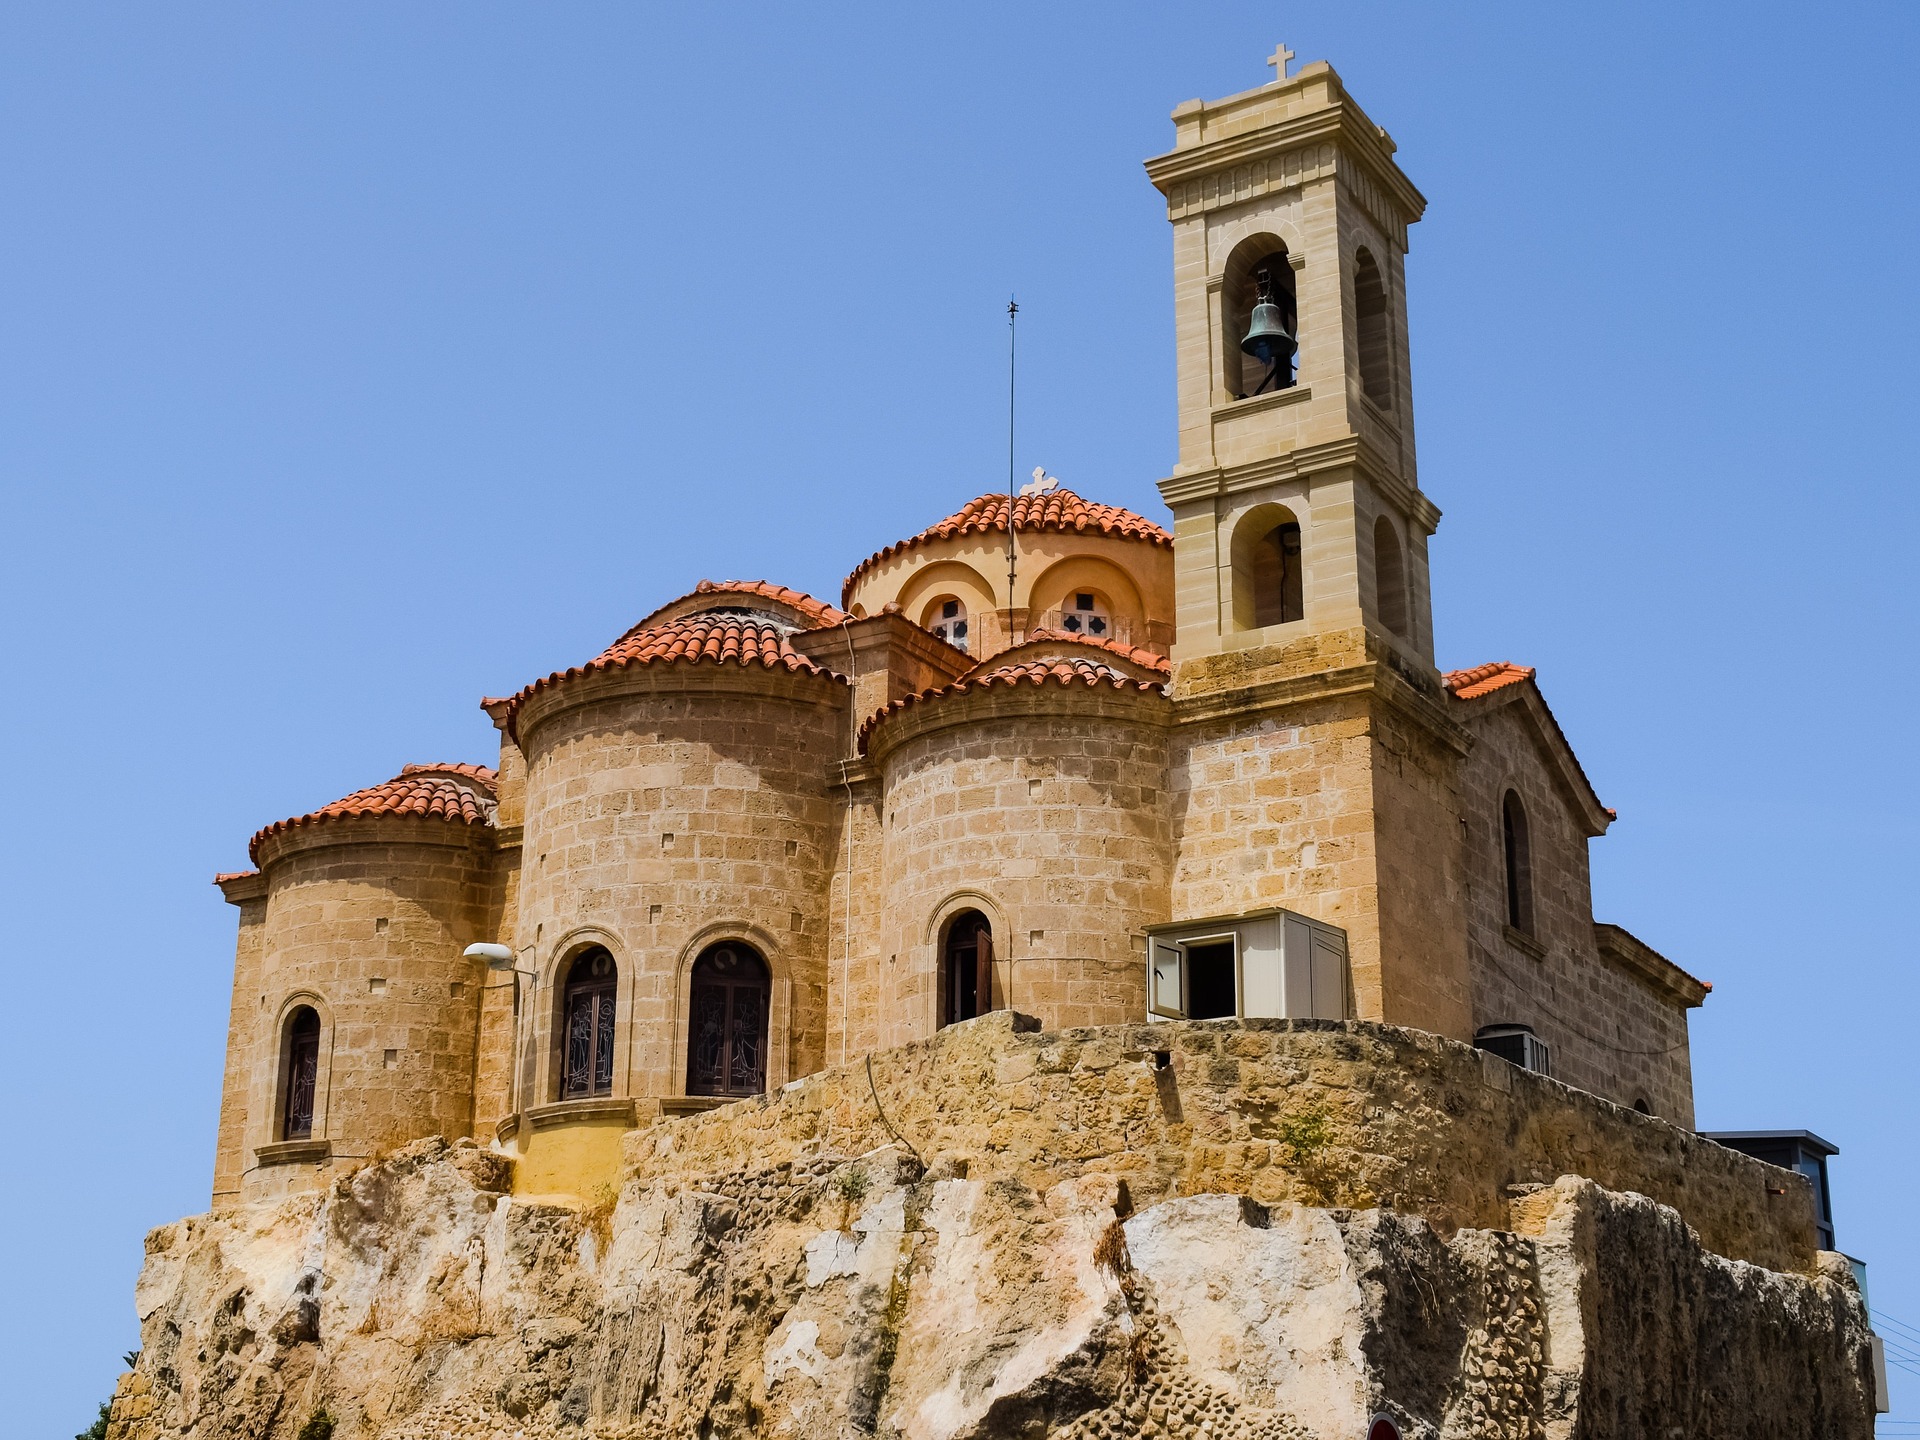 Food, Wine & Culture of Paphos – Whats not to love?